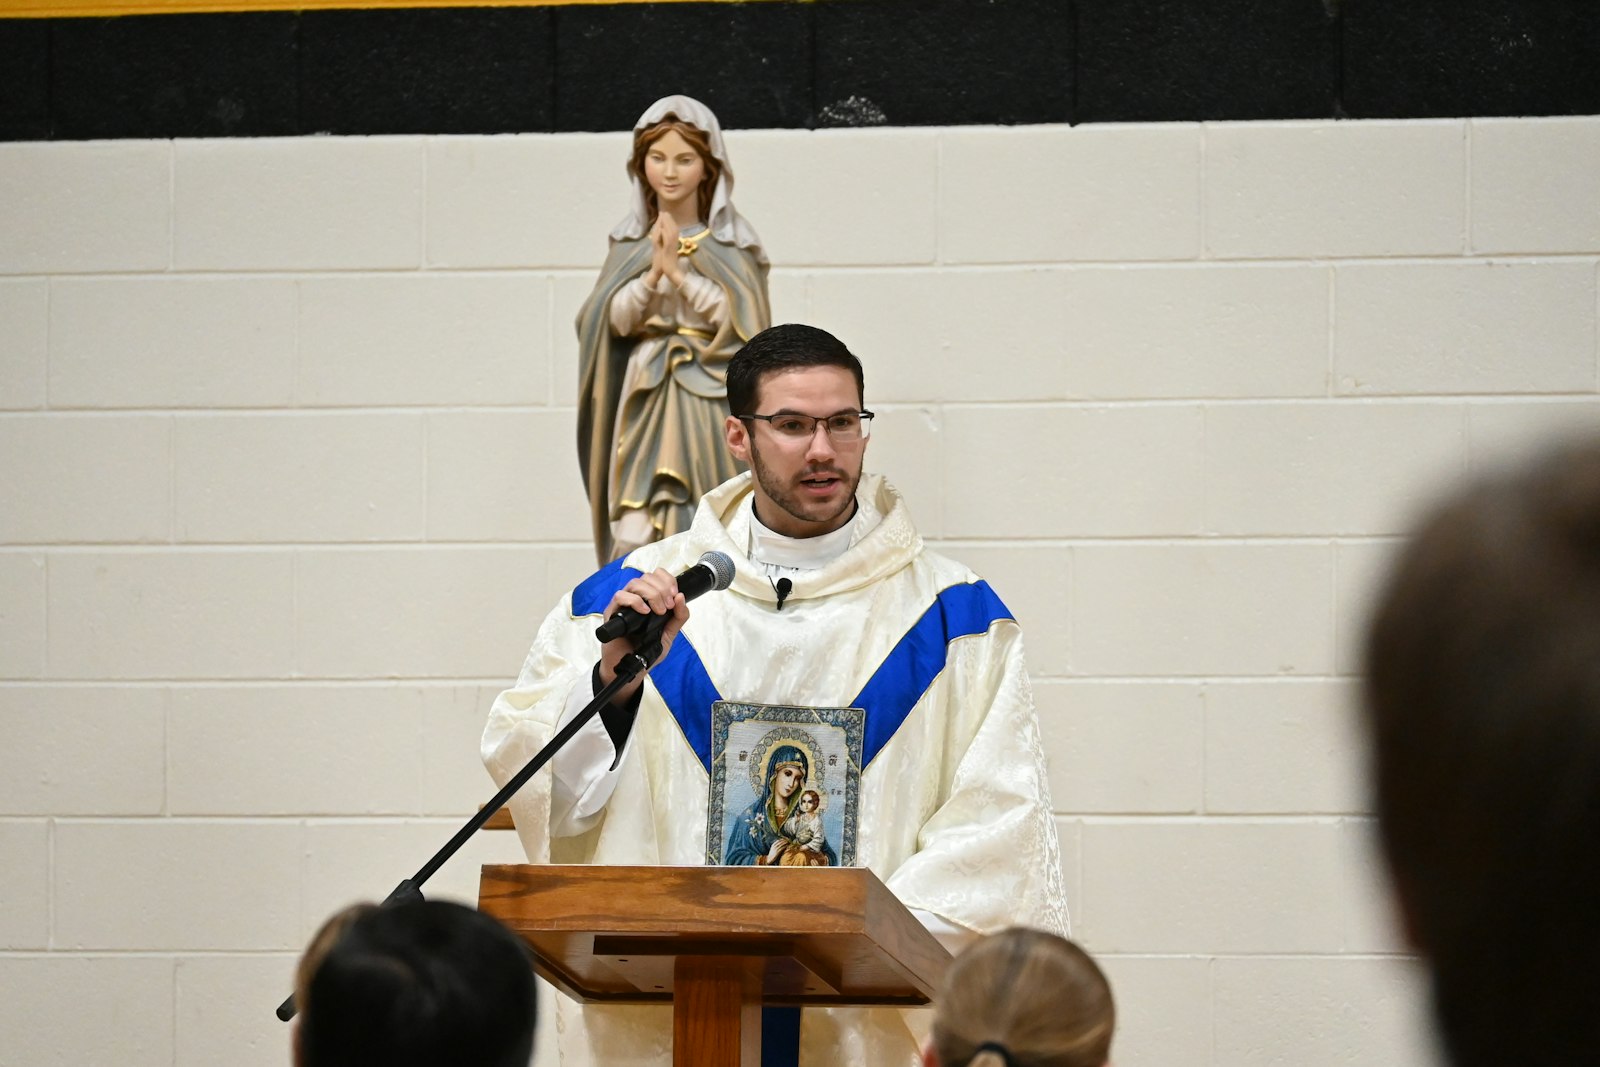 Fr. Schupbach said he was a “bit overwhelmed” to return to Everest, where he graduated in 2014, and celebrate Mass for the students. “I felt pressure to impart a good message to the kids,” he said. “I received an incredible gift from Everest, and part of that was due to a choice I made to embrace the identity that Everest formed me in. I see what a blessing that has been for me, and it matters to me that these kids make the same choice.”